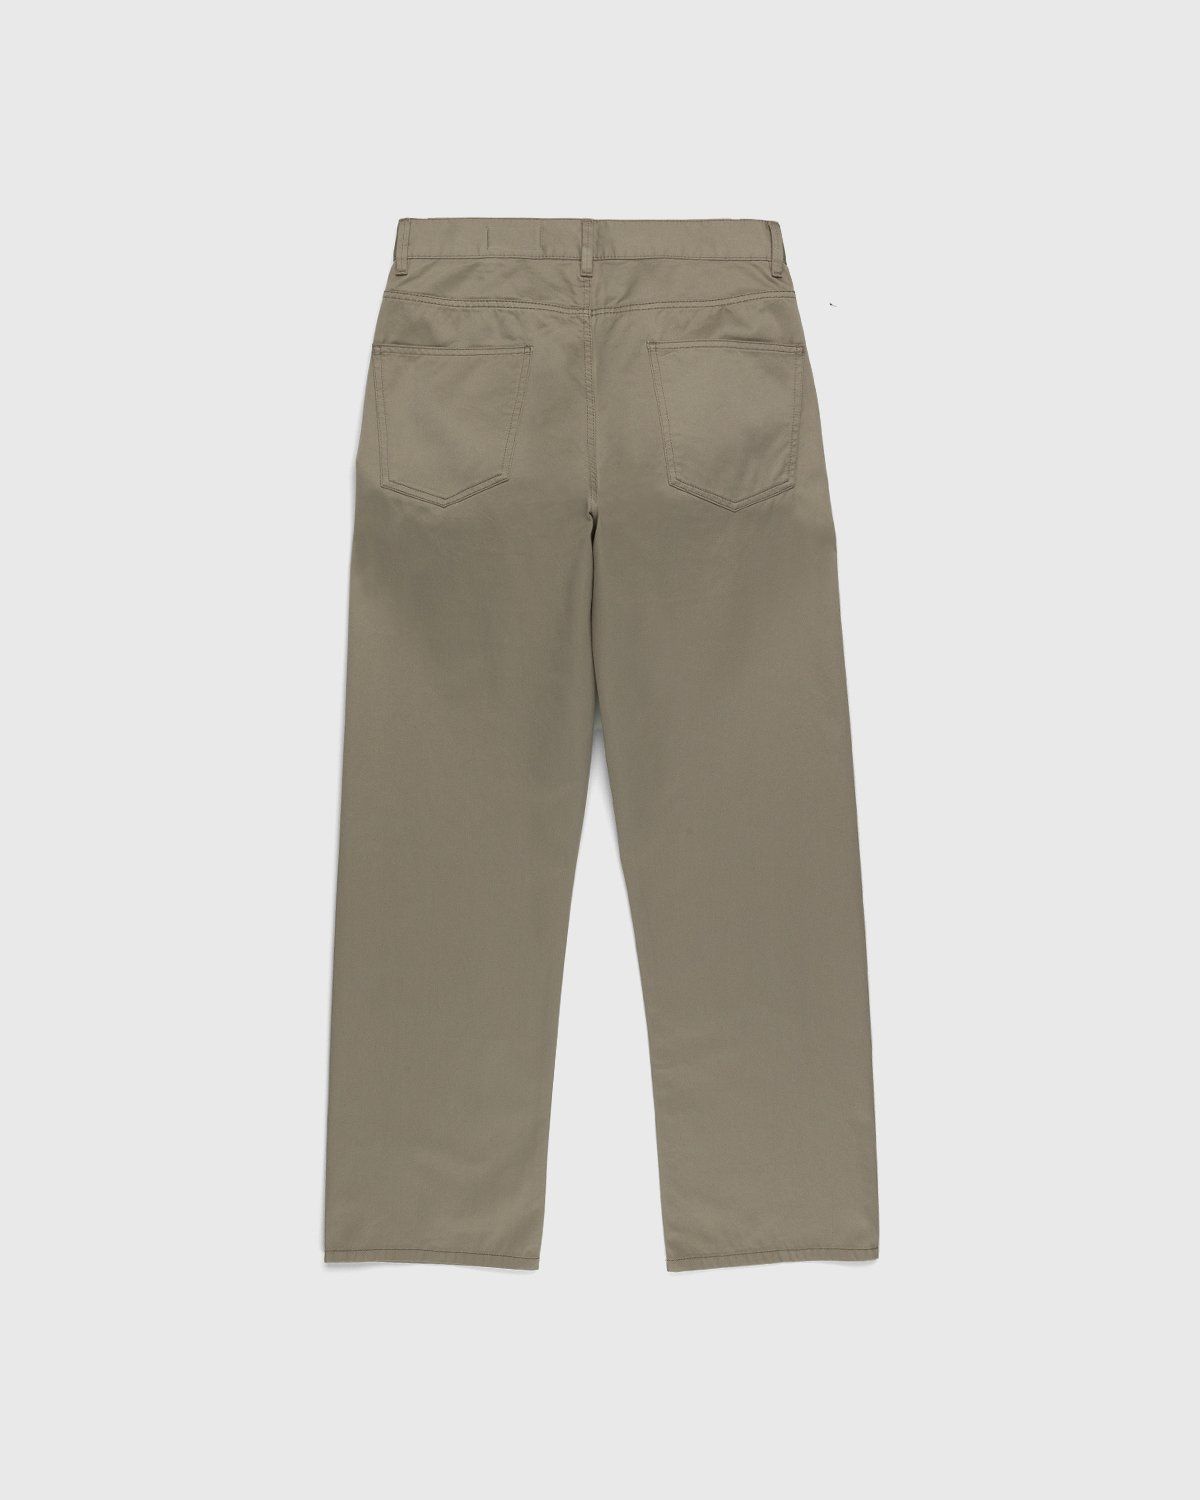 Lemaire – Seamless Pants Light Taupe - Trousers - Beige - Image 2